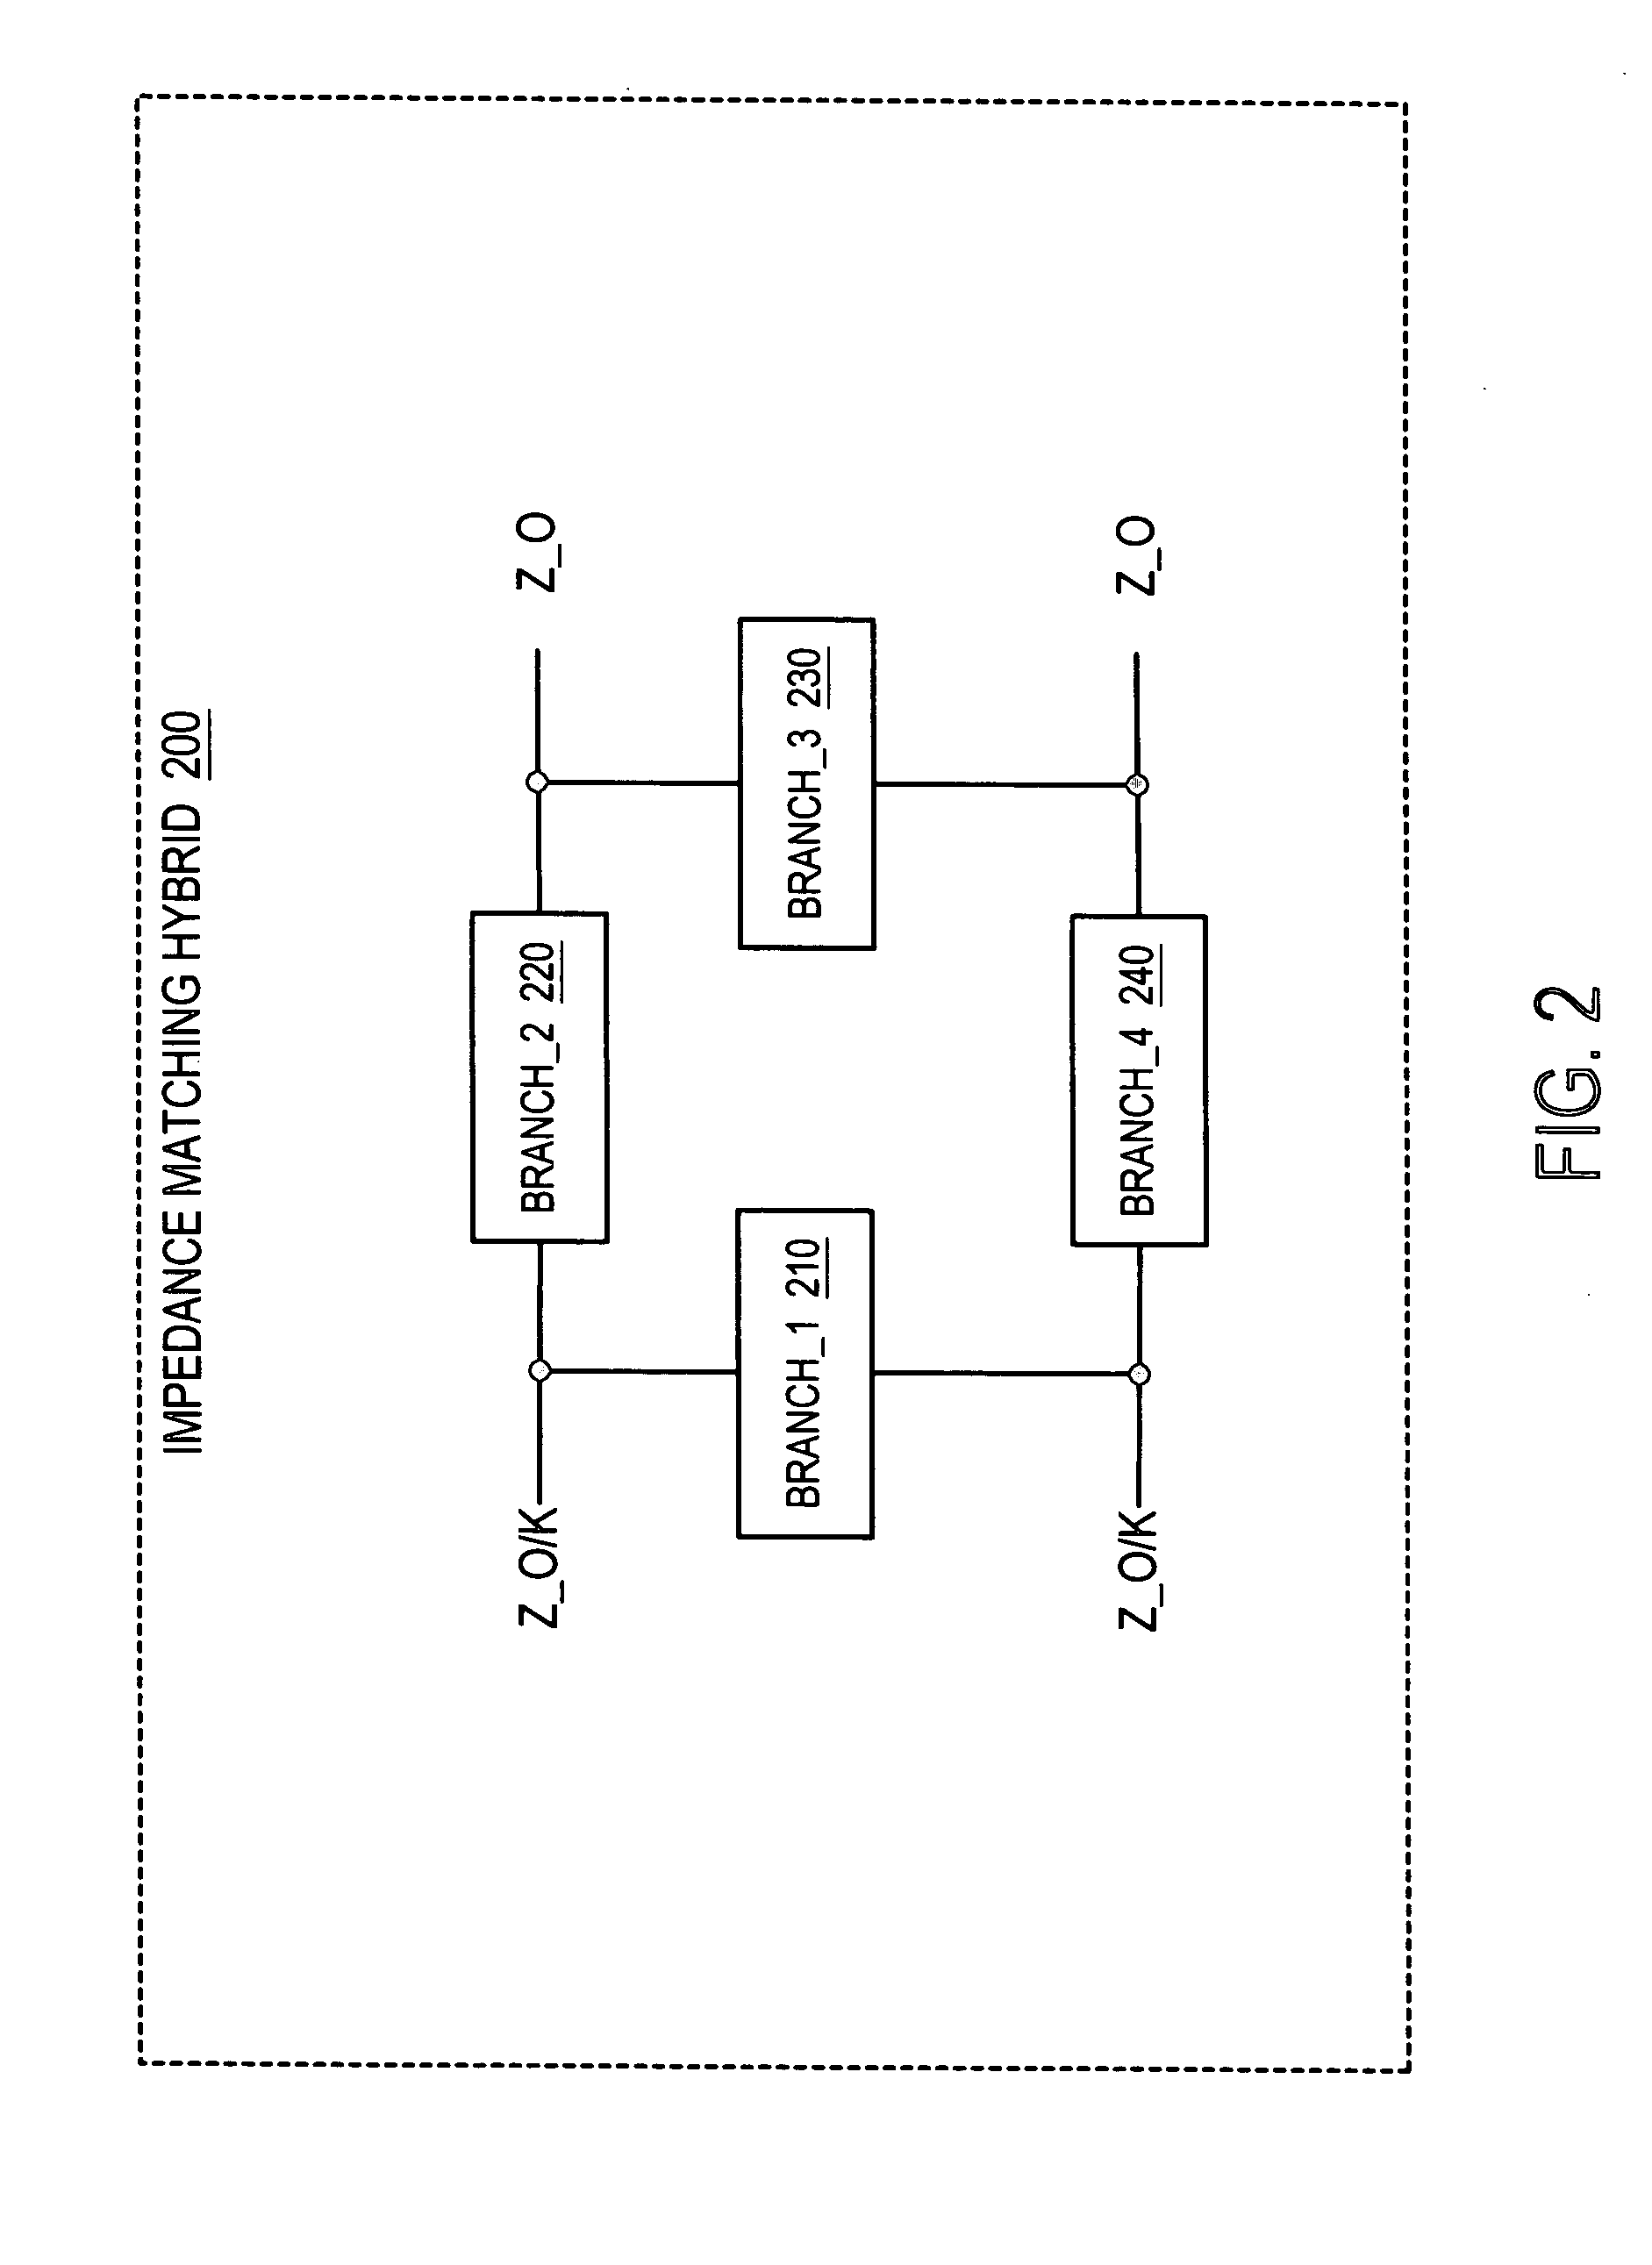 Power amplifier utilizing quadrature hybrid for power dividing, combining and impedance matching